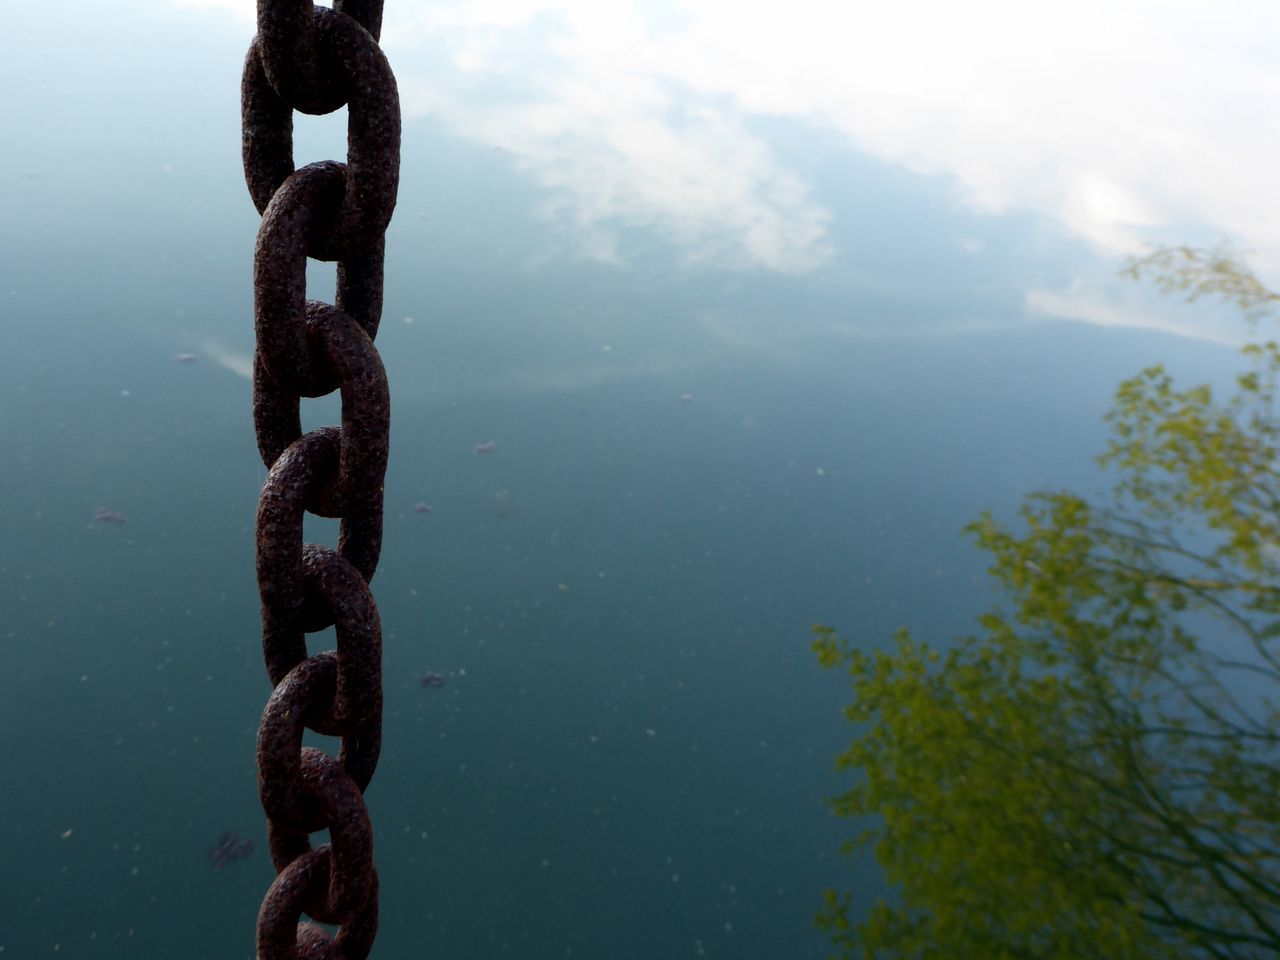 CLOSE-UP OF METAL CHAIN AGAINST LAKE